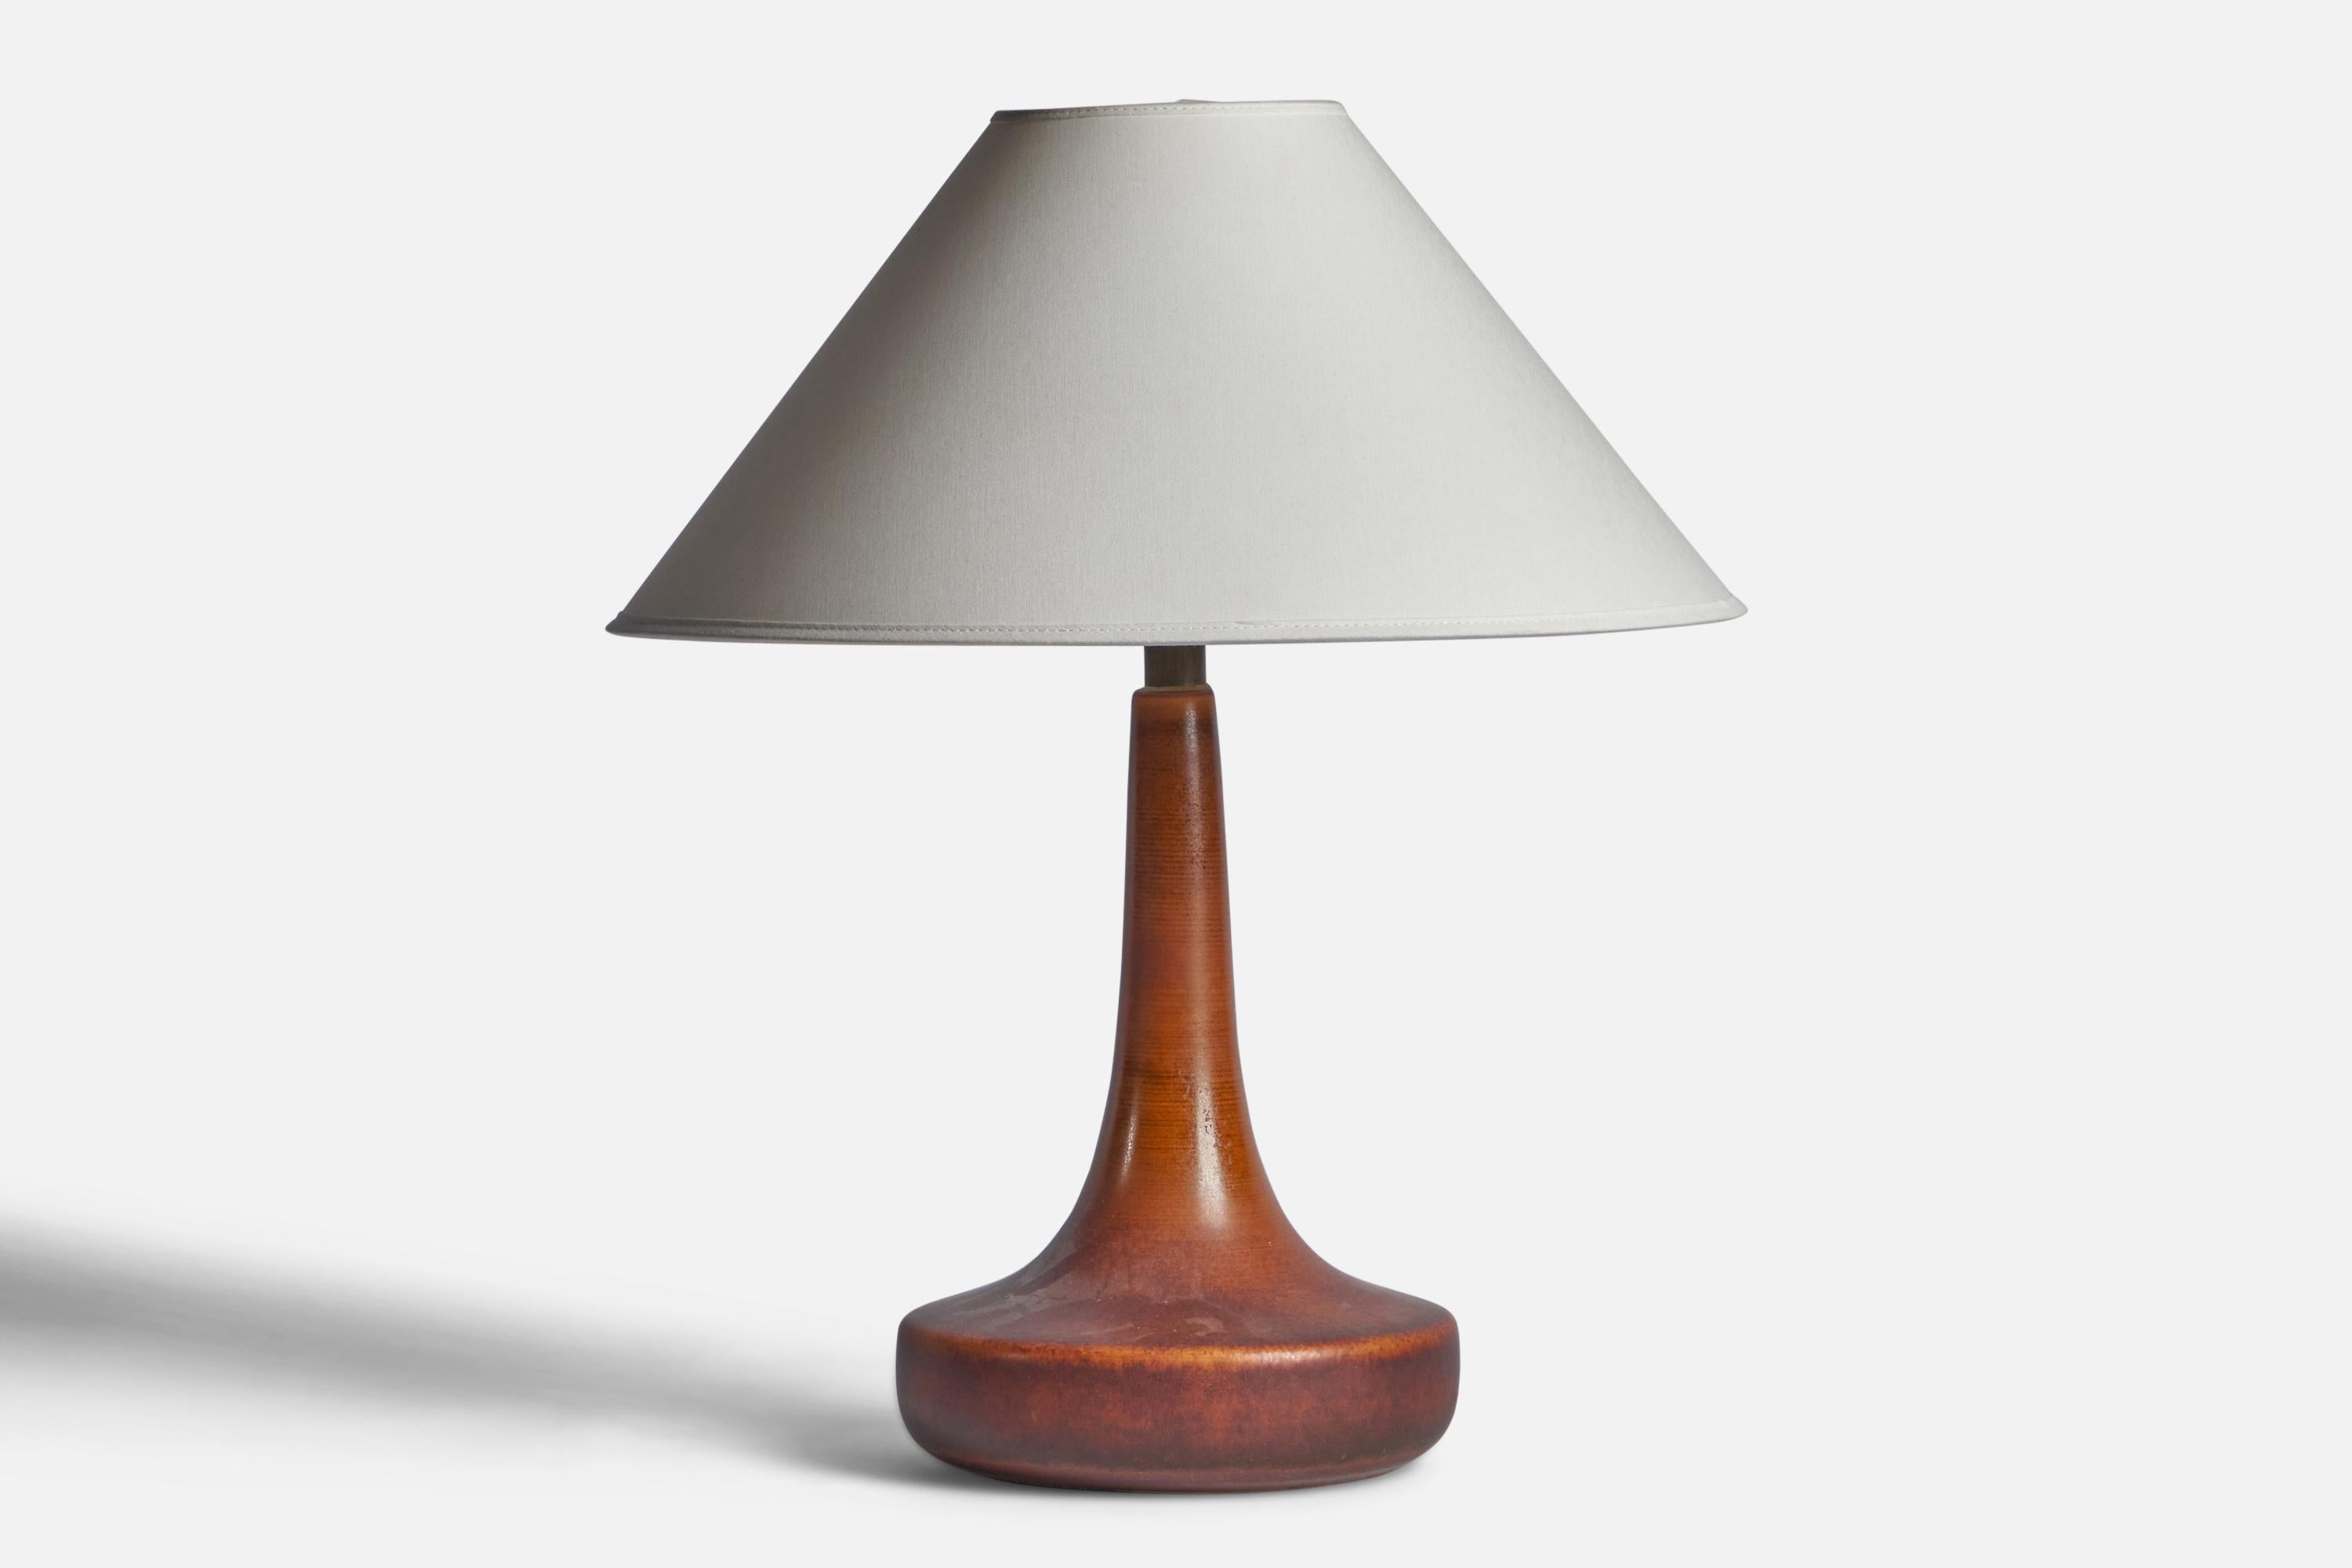 A brown-glazed ceramic and brass table lamp designed and produced by Lotte and Gunnar Bostlund, Canada, 1960s.

Dimensions of Lamp (inches): 14.75” H x 5.85” Diameter
Dimensions of Shade (inches): 4.5” Top Diameter x 16” Bottom Diameter x 7.25”